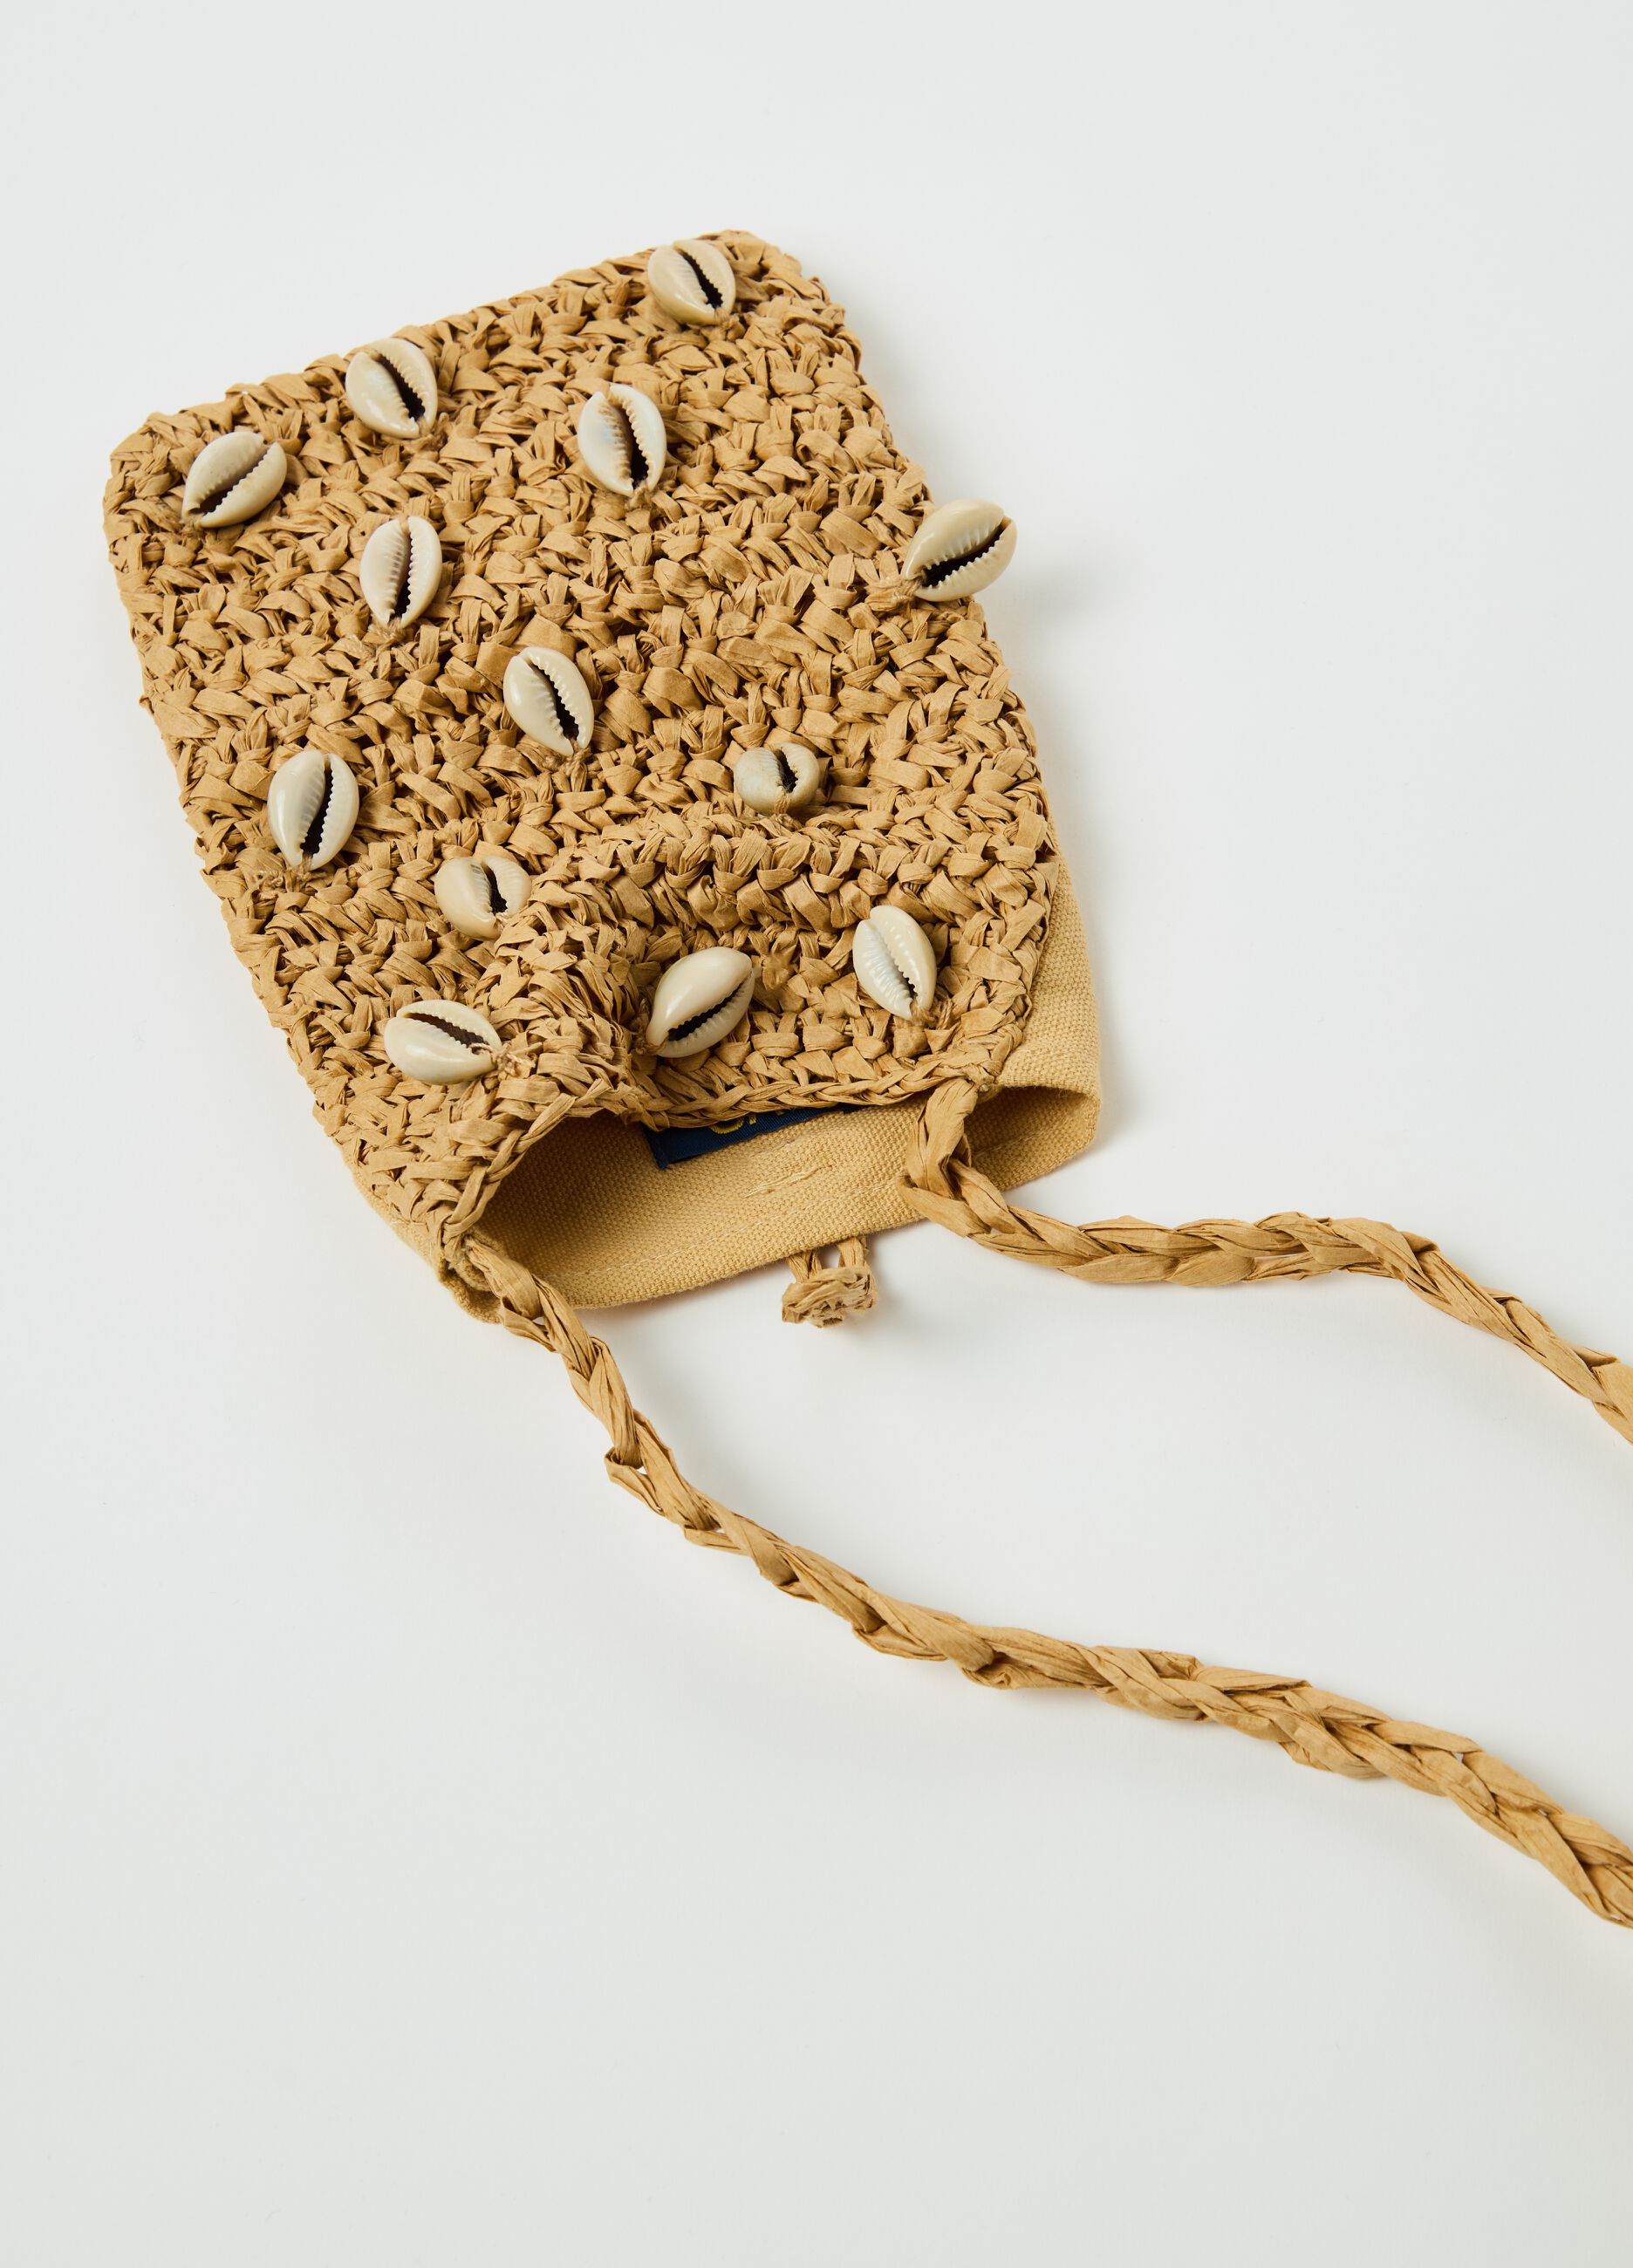 Raffia mobile phone holder with shells